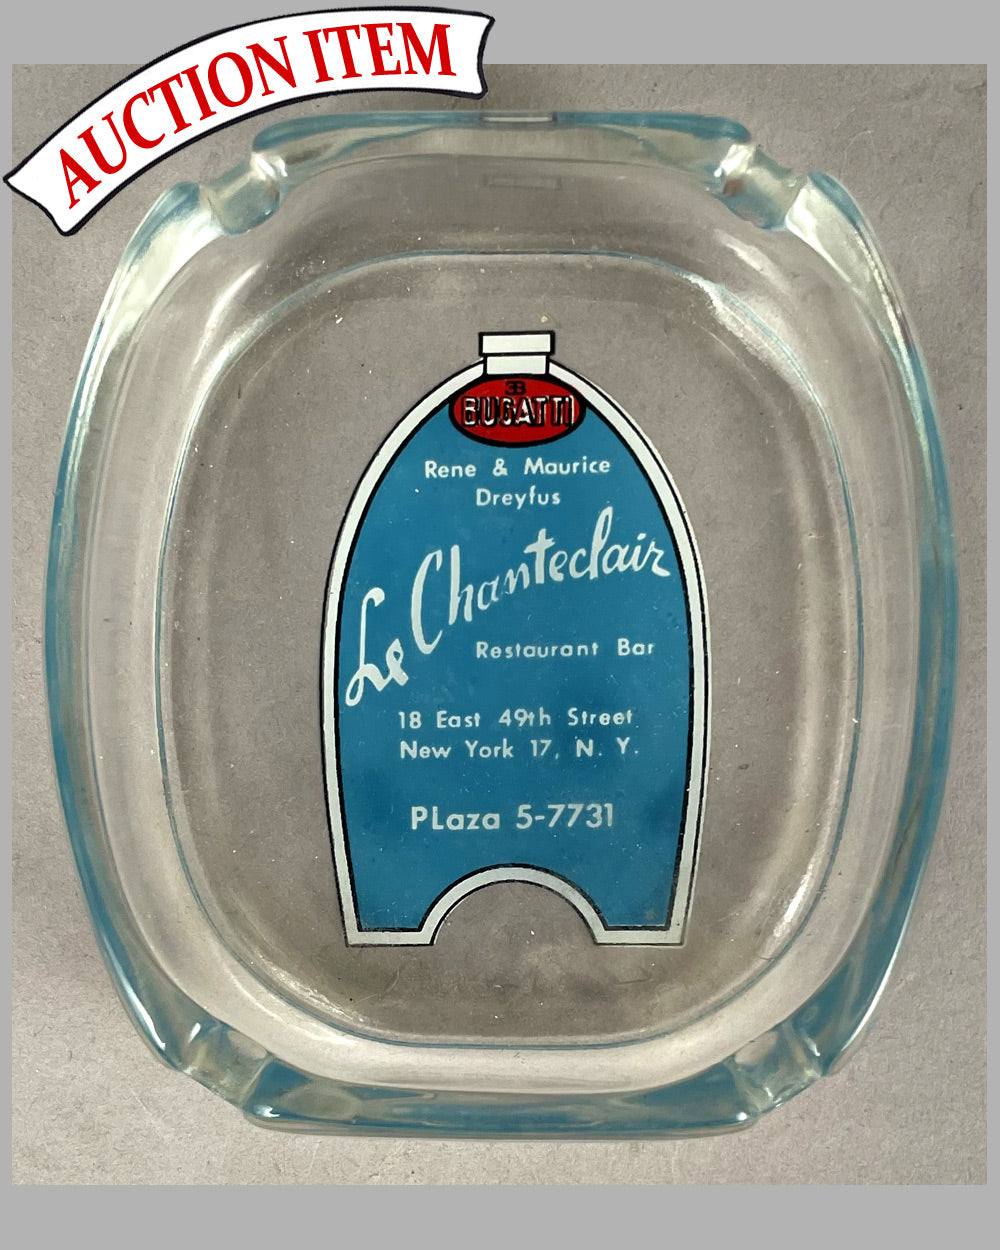 Le Chanteclair ashtray from Rene Dreyfus’ famous French restaurant in N.Y.C.